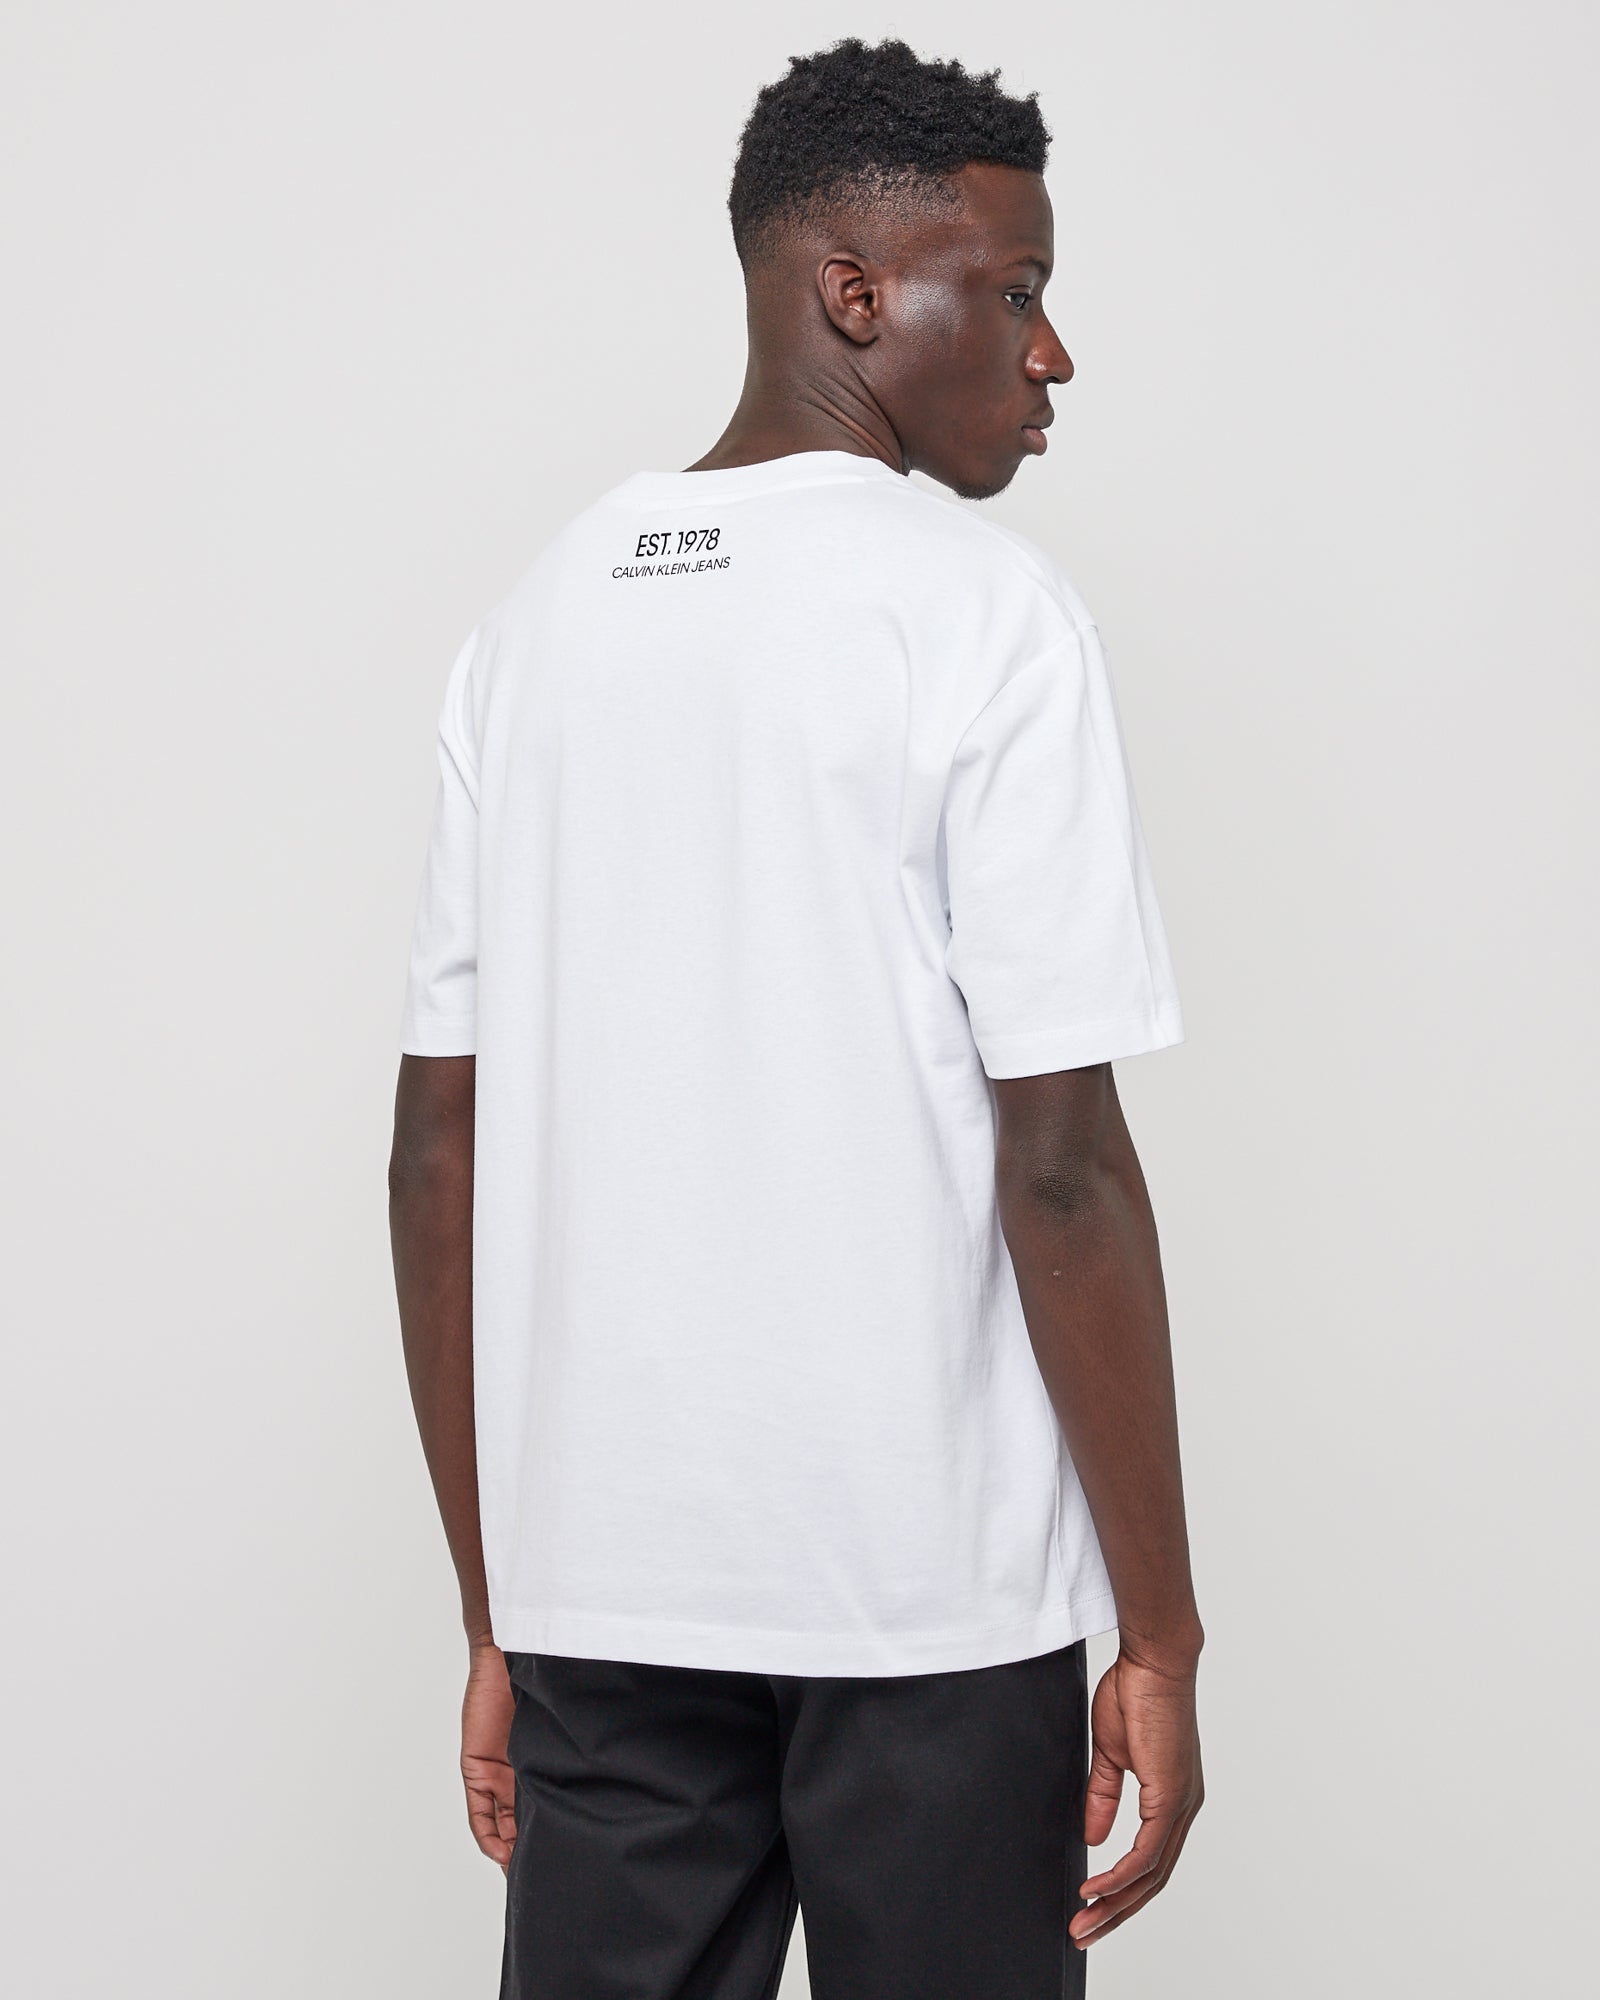 Lunar Ascent SS T-Shirt in White